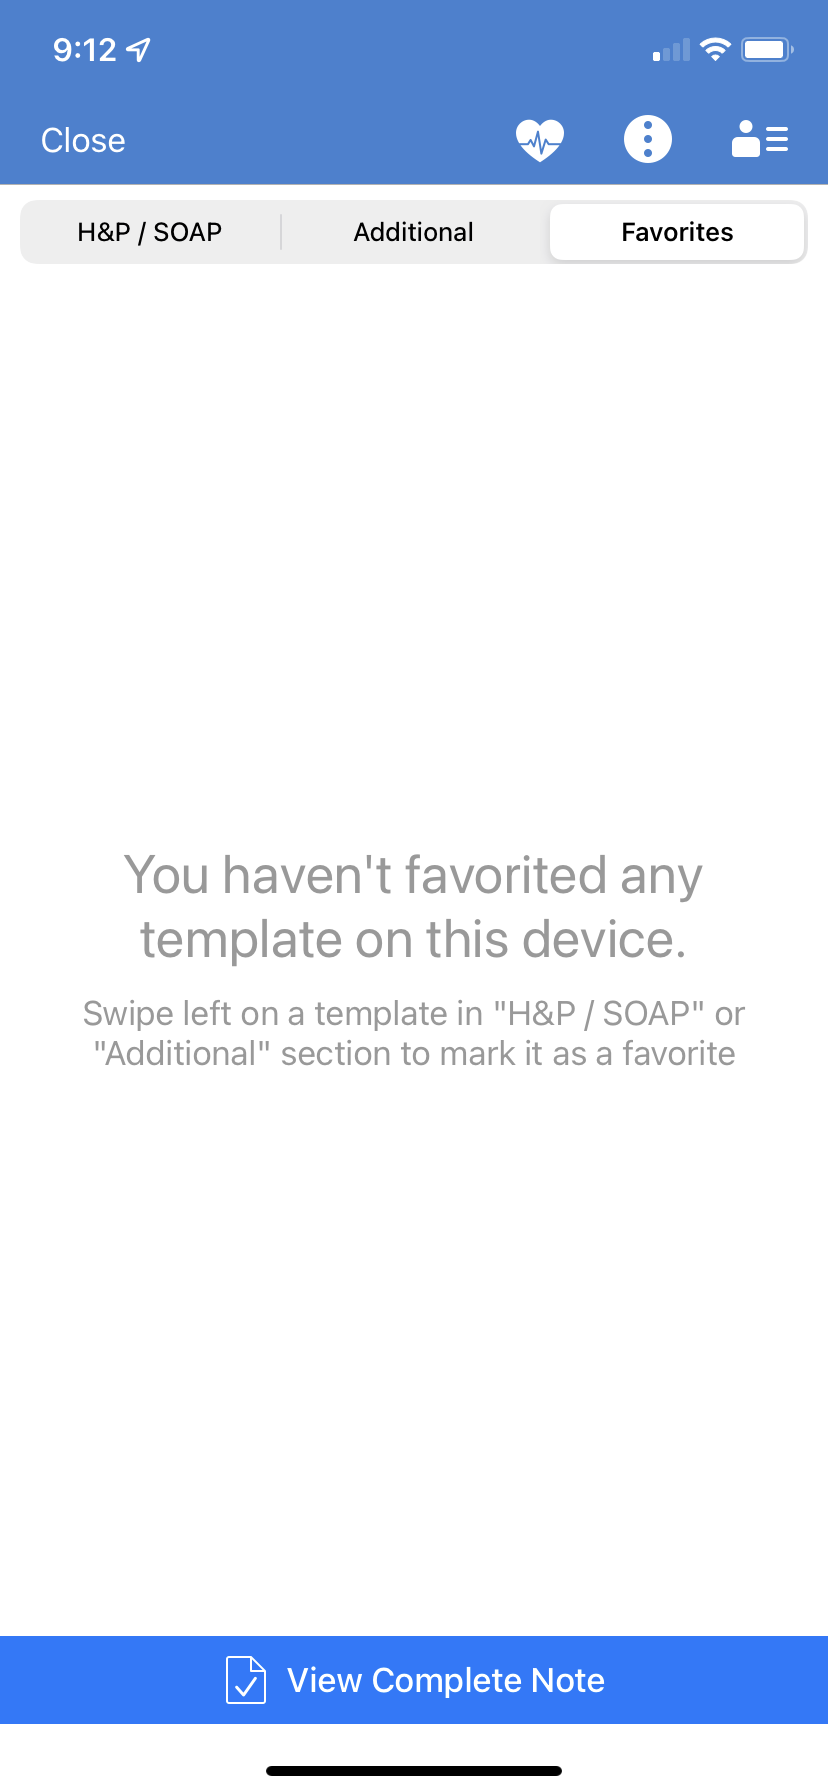 Templates_Favorites_Empty.PNG